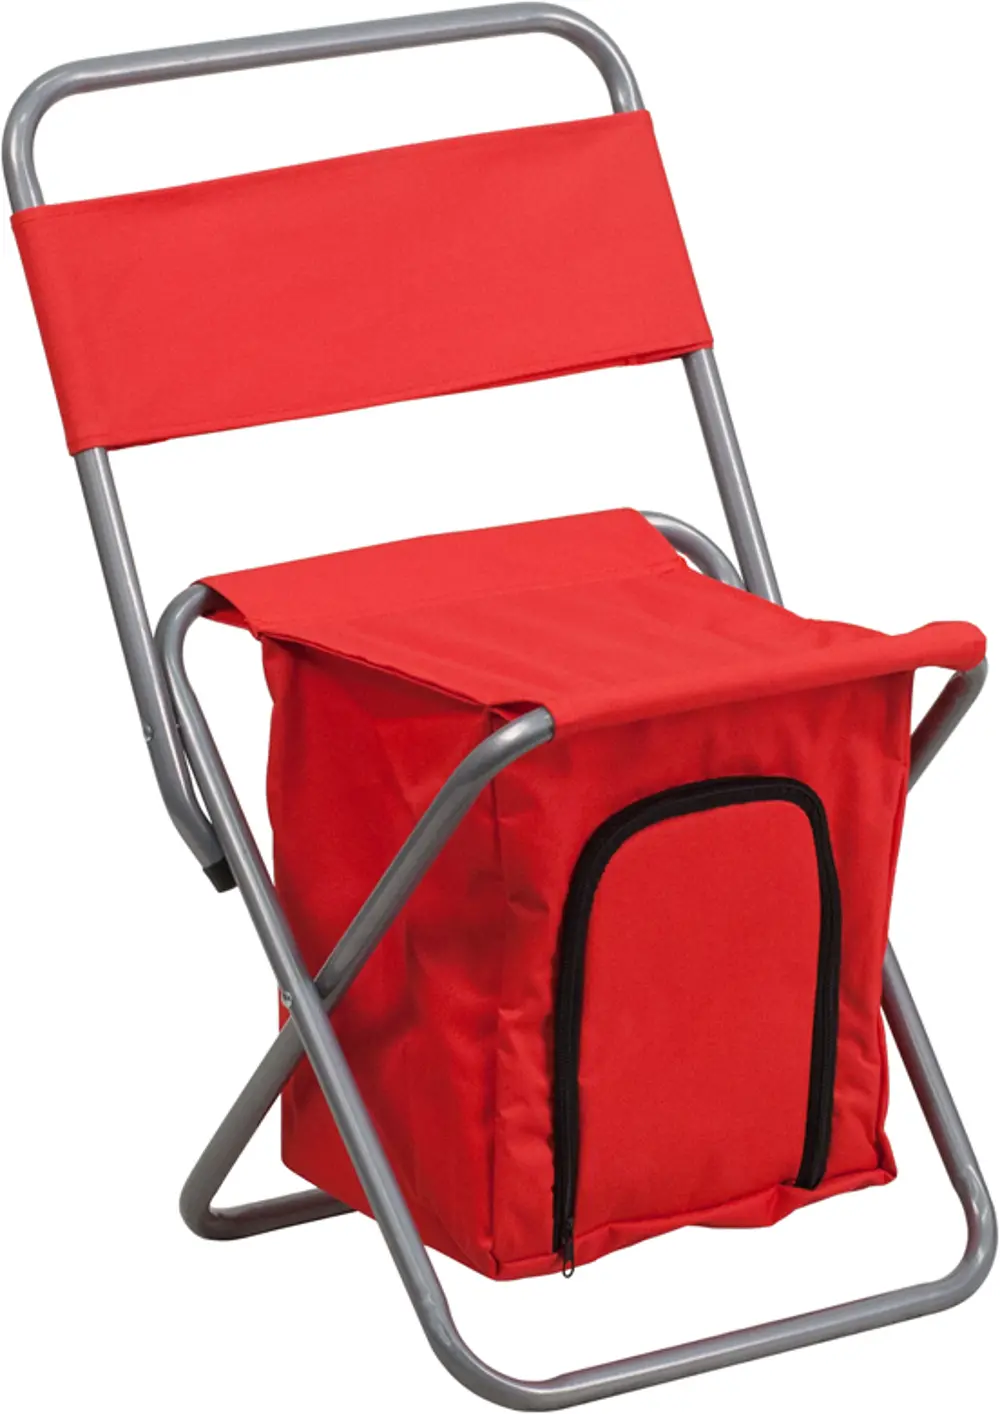 Kids Red Folding Camping Chair-1